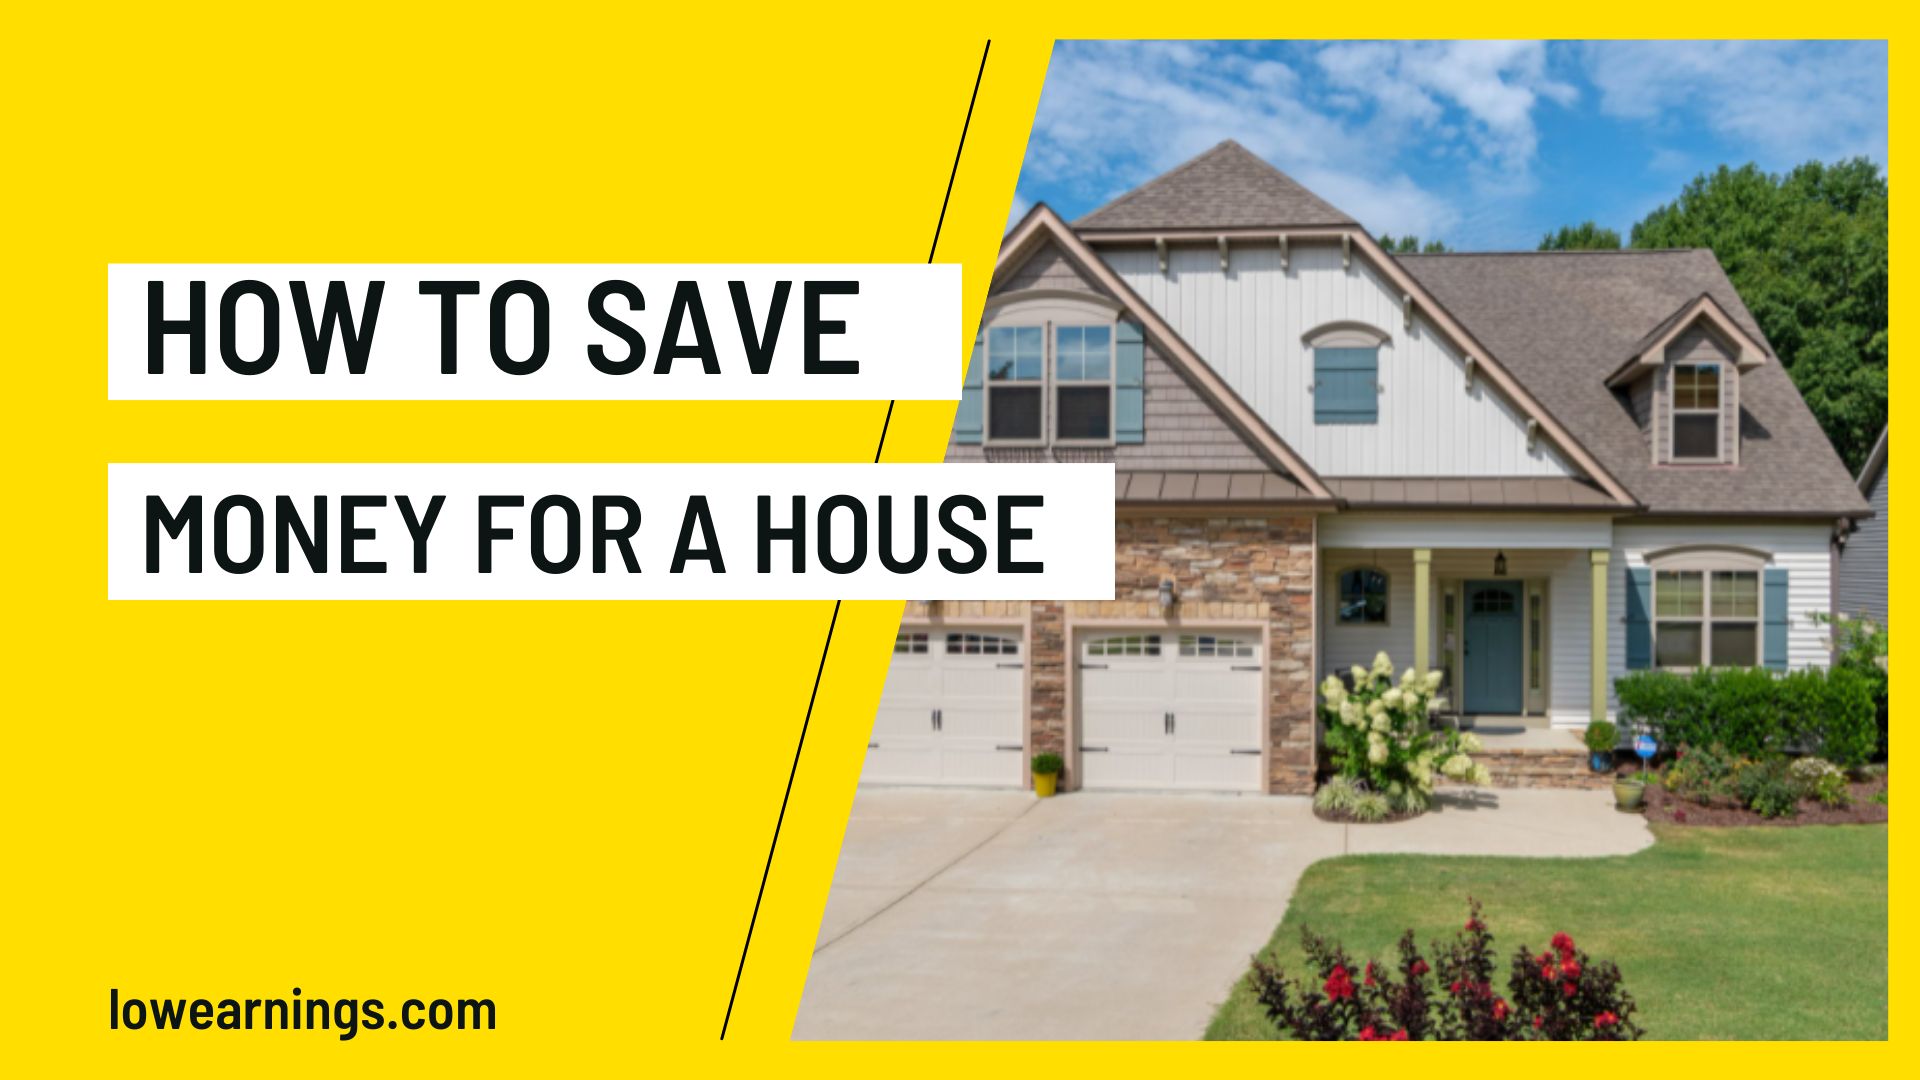 How to save money for a house